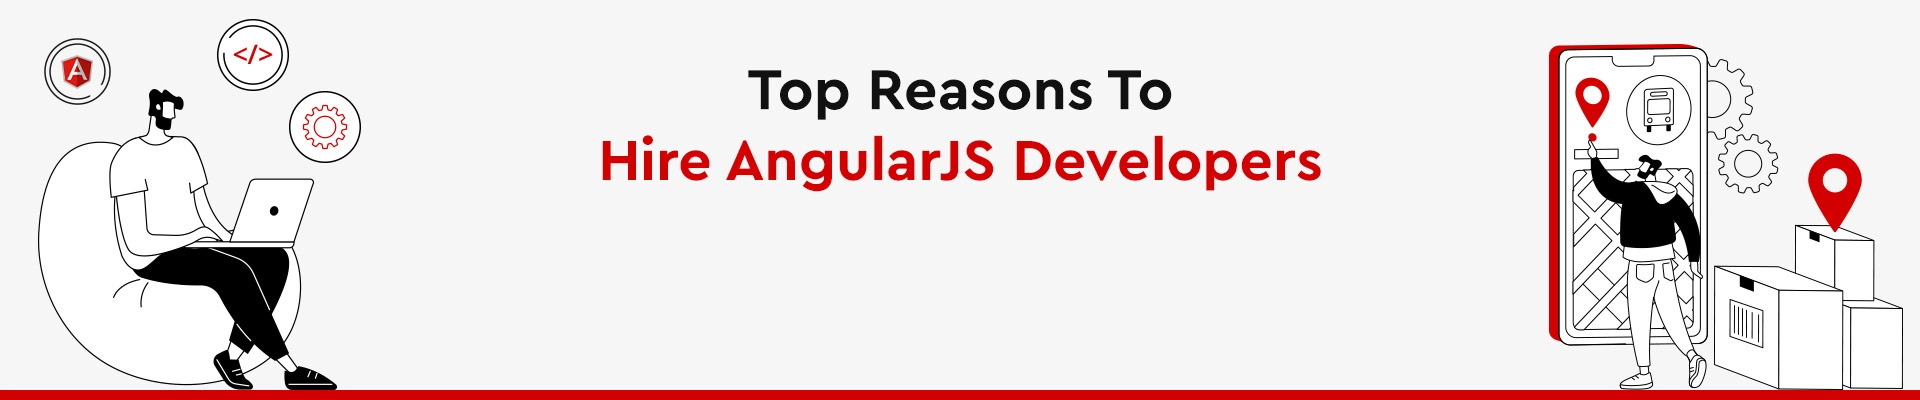 Top Reasons To Hire AngularJS Developers